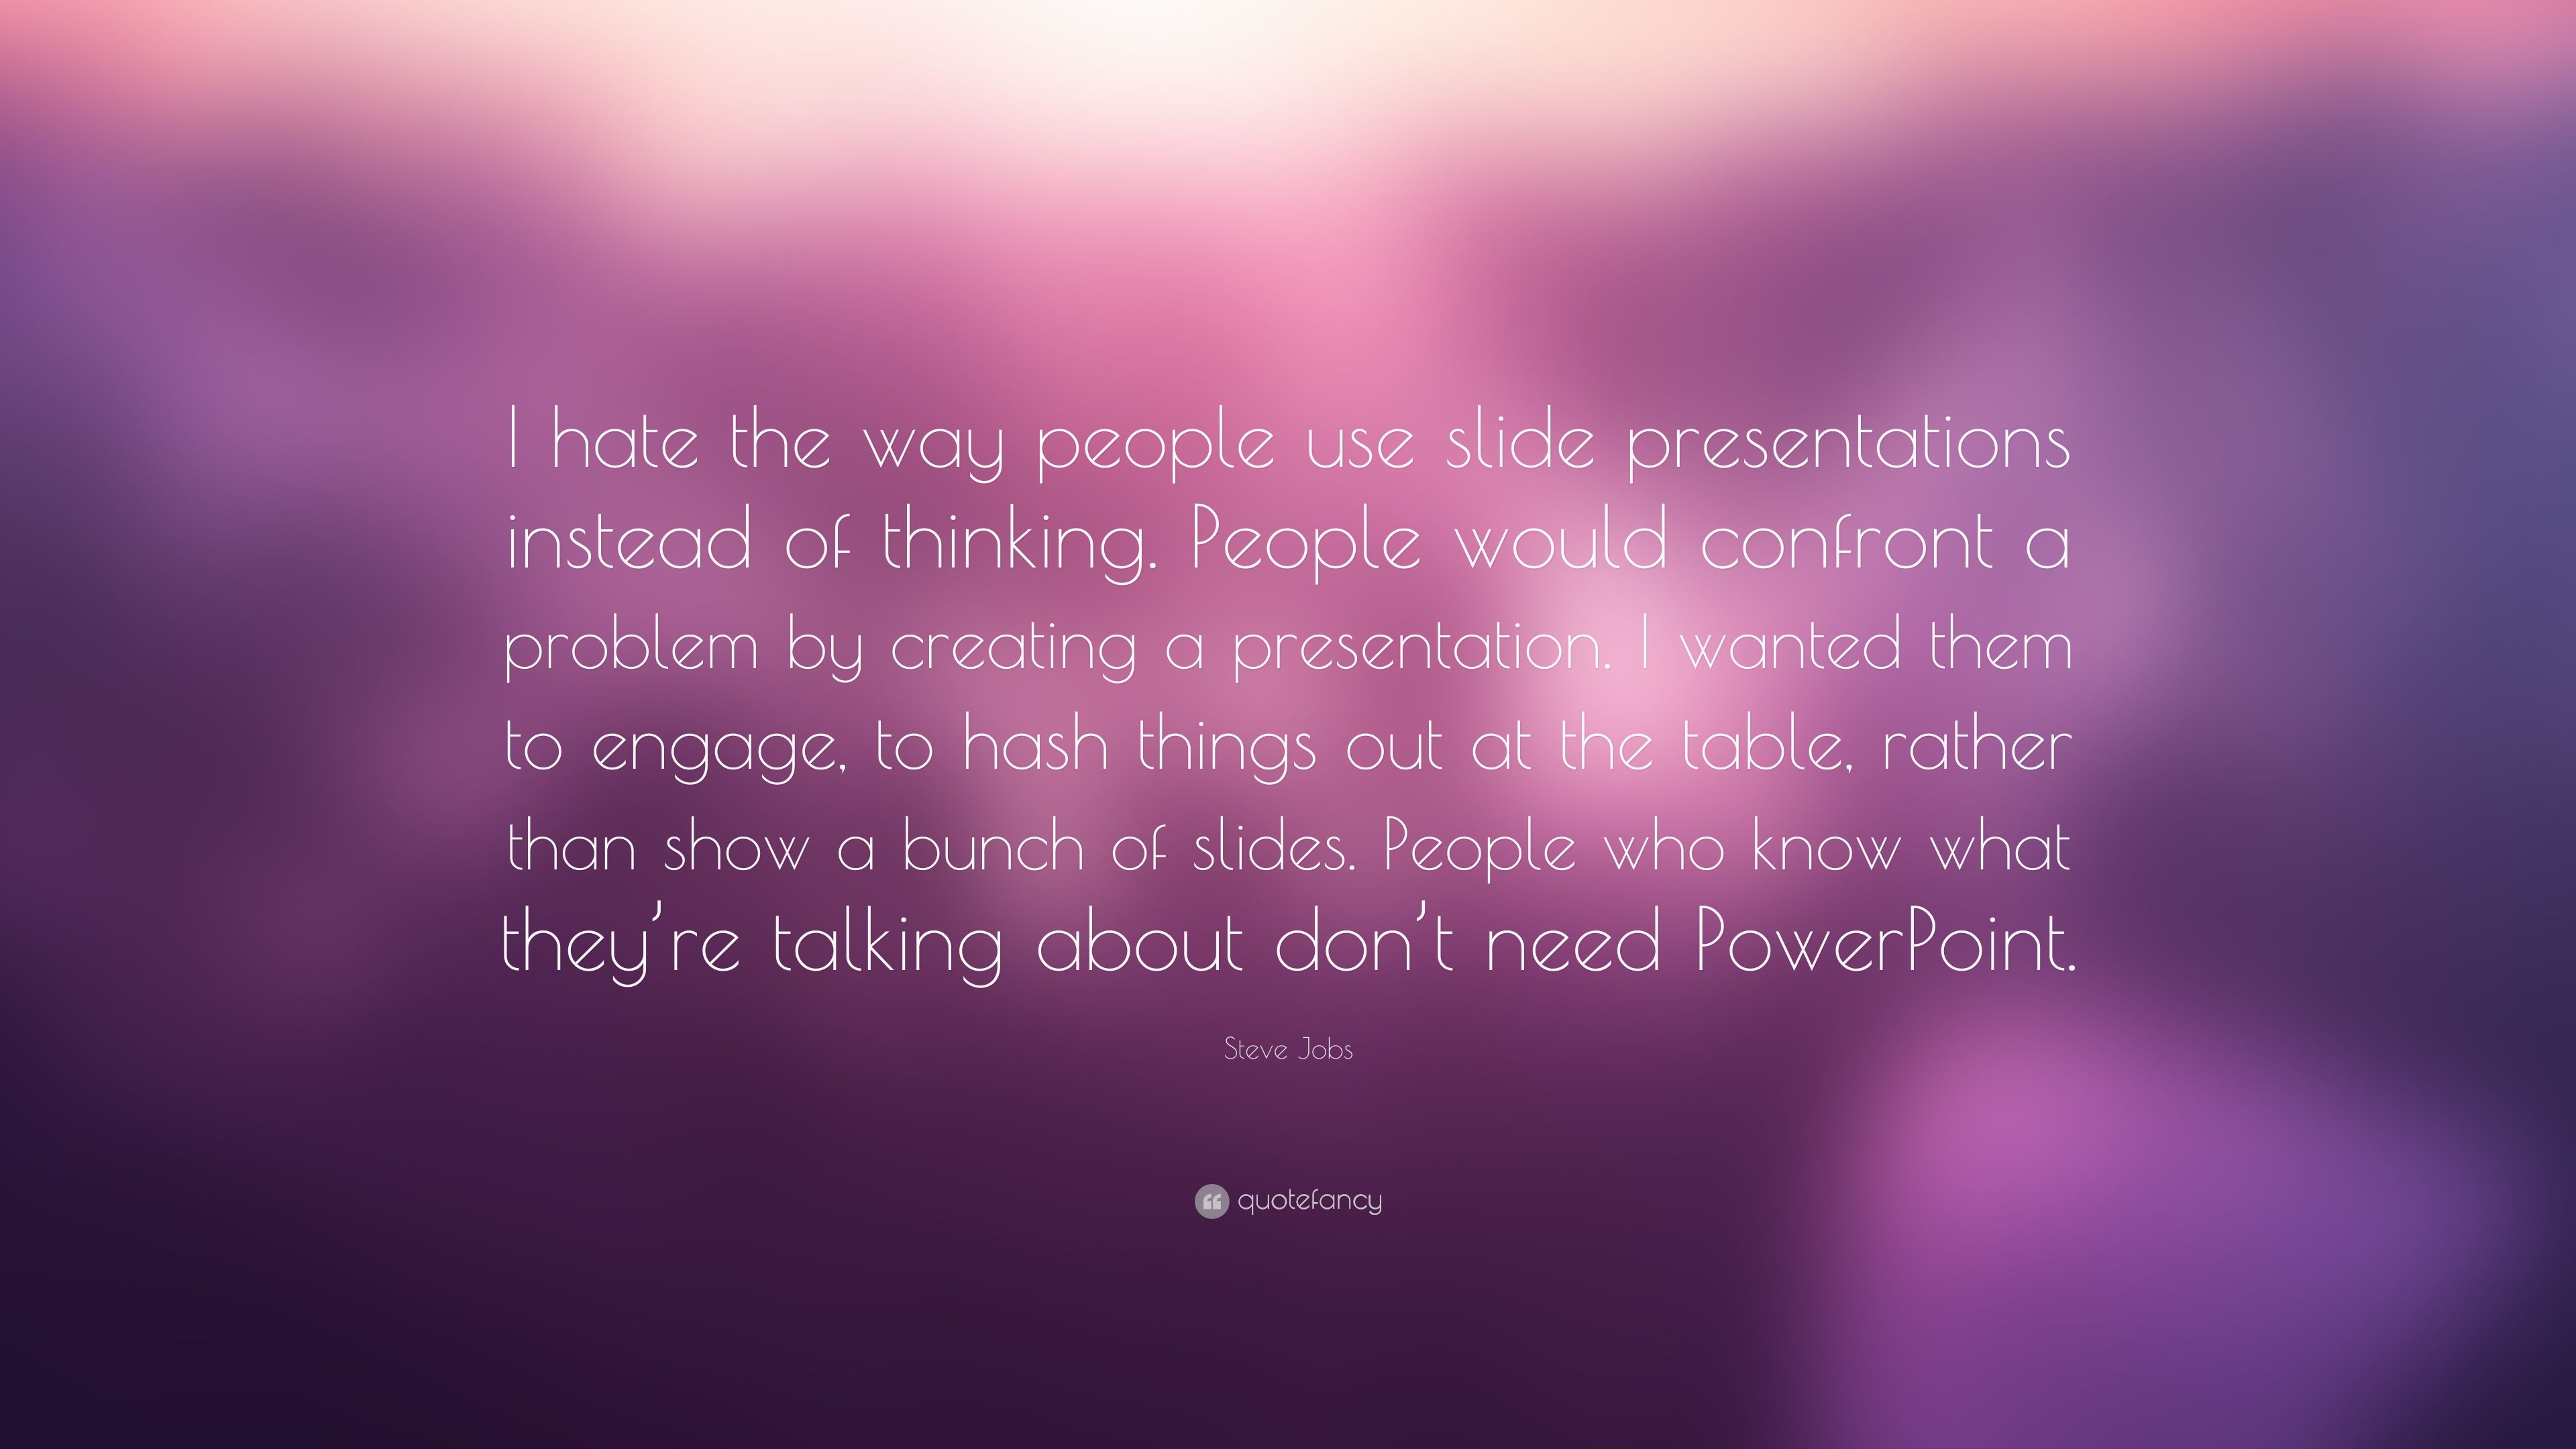 Steve Jobs Quote: “I hate the way people use slide presentations instead of thinking. People would confront a problem by creating a present.” (7 wallpaper)